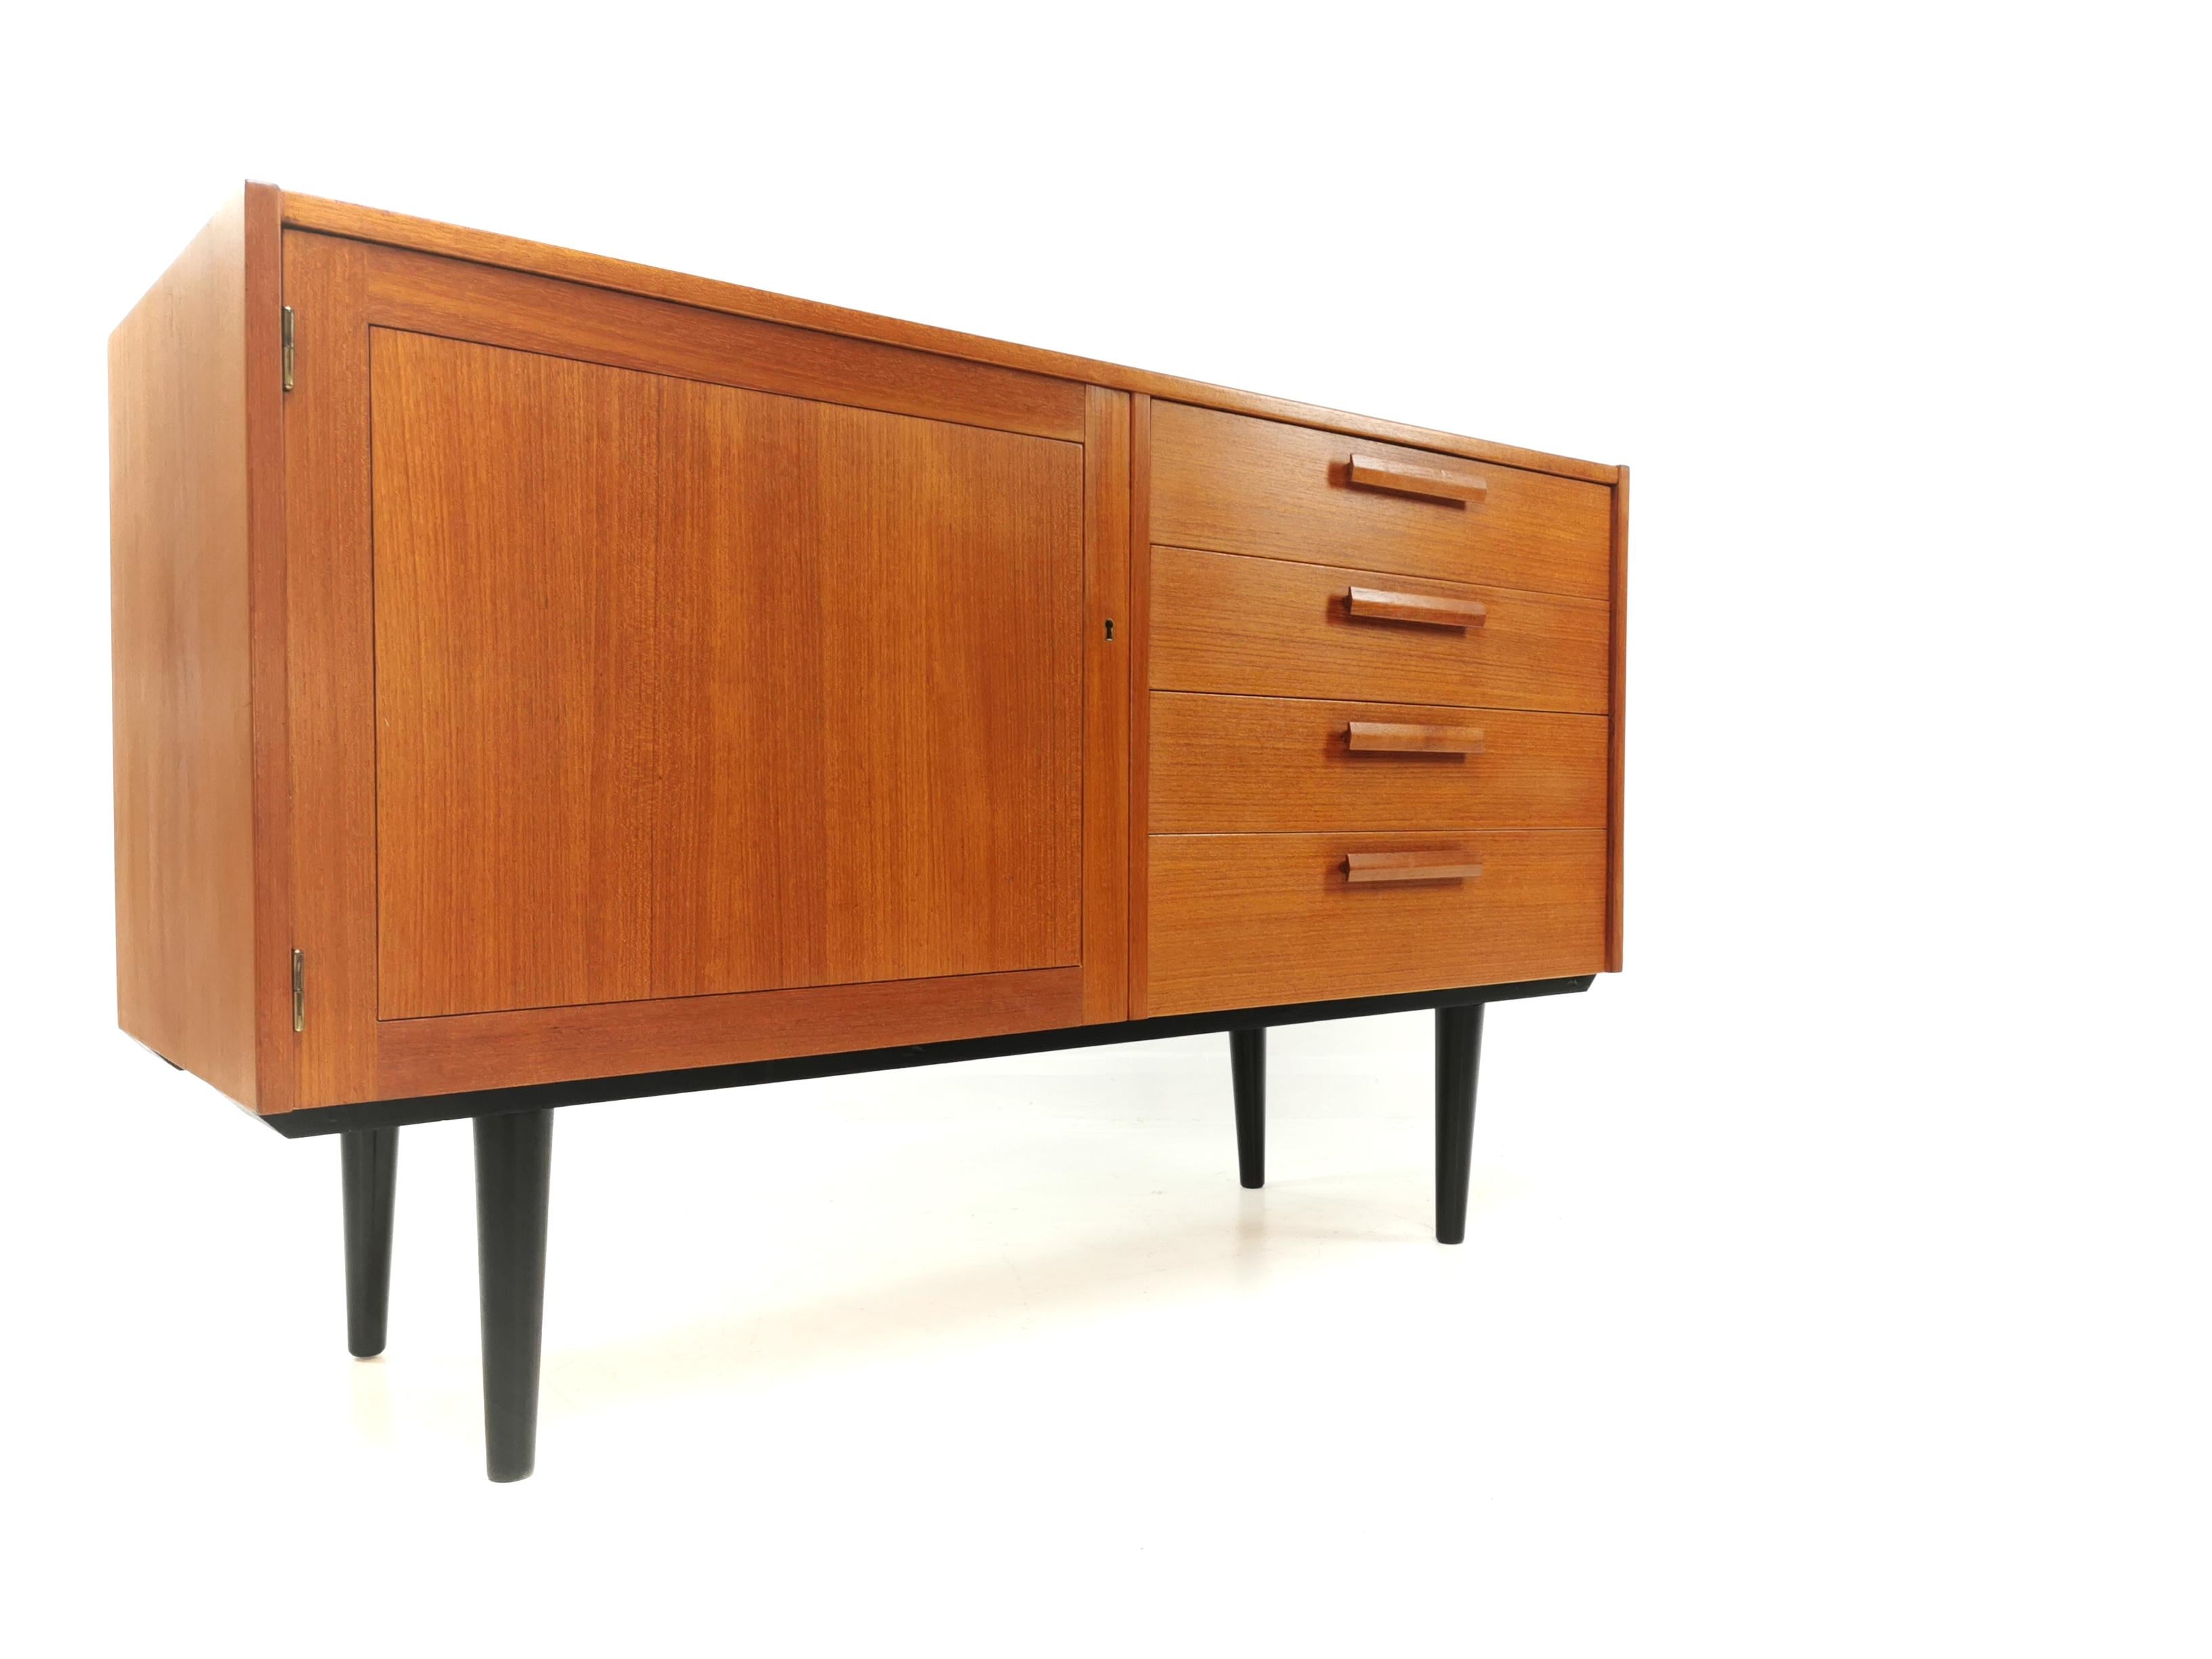 Bjarnum sideboard by Nils Jonsson for Troeds.
Raised on ebonized timber legs and featuring 4 drawers and lockable cupboard space.
High quality. Made from teak. Made in Sweden.